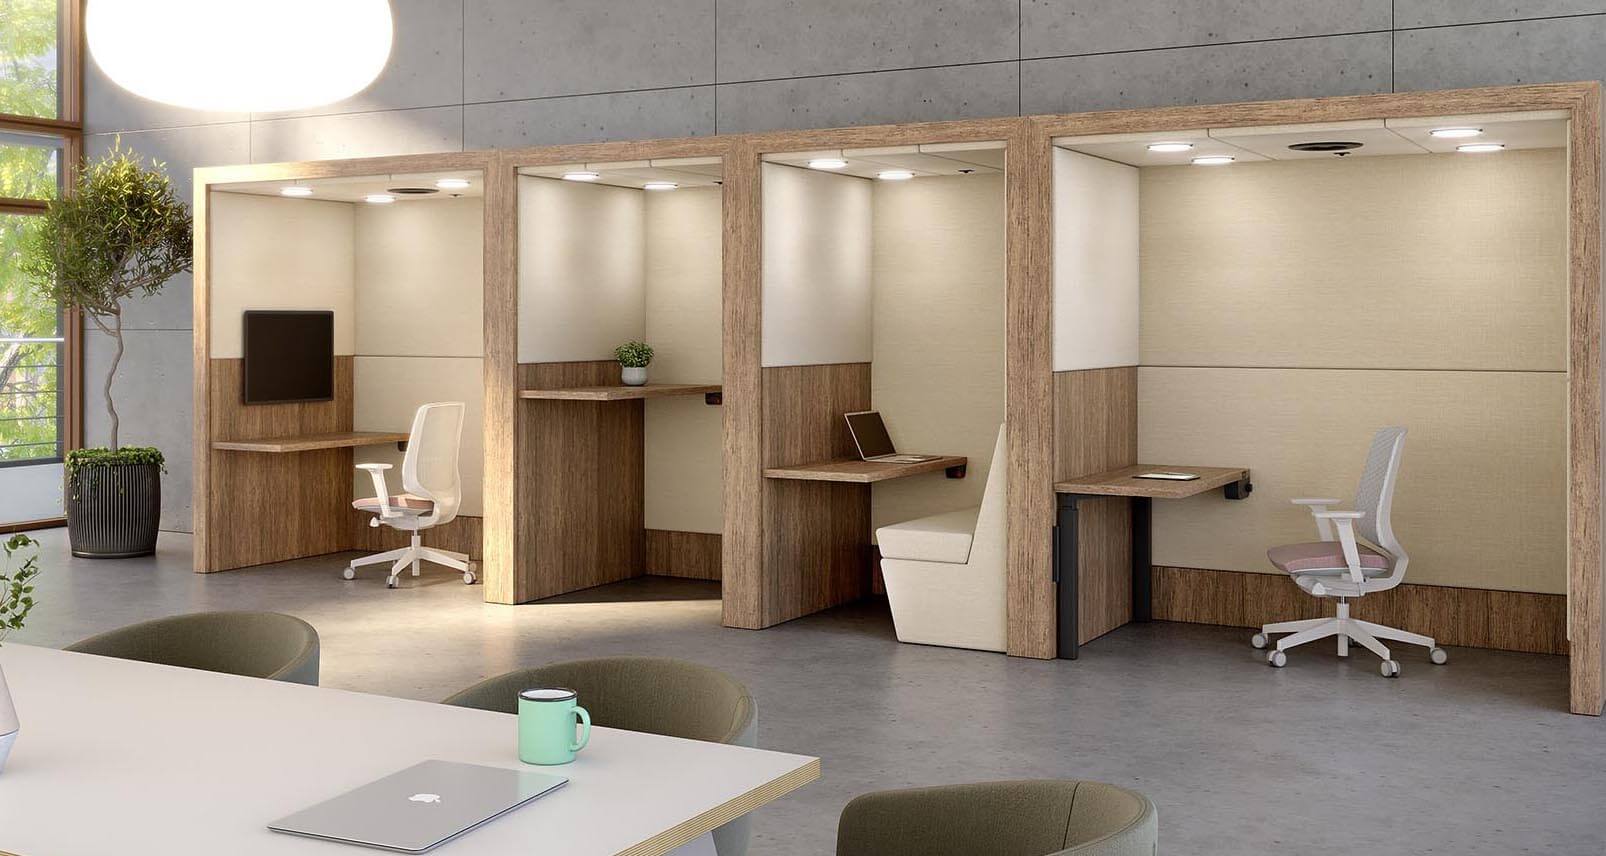 Spacestor Portals for Zoom call privacy and limiting noise disruption in the office